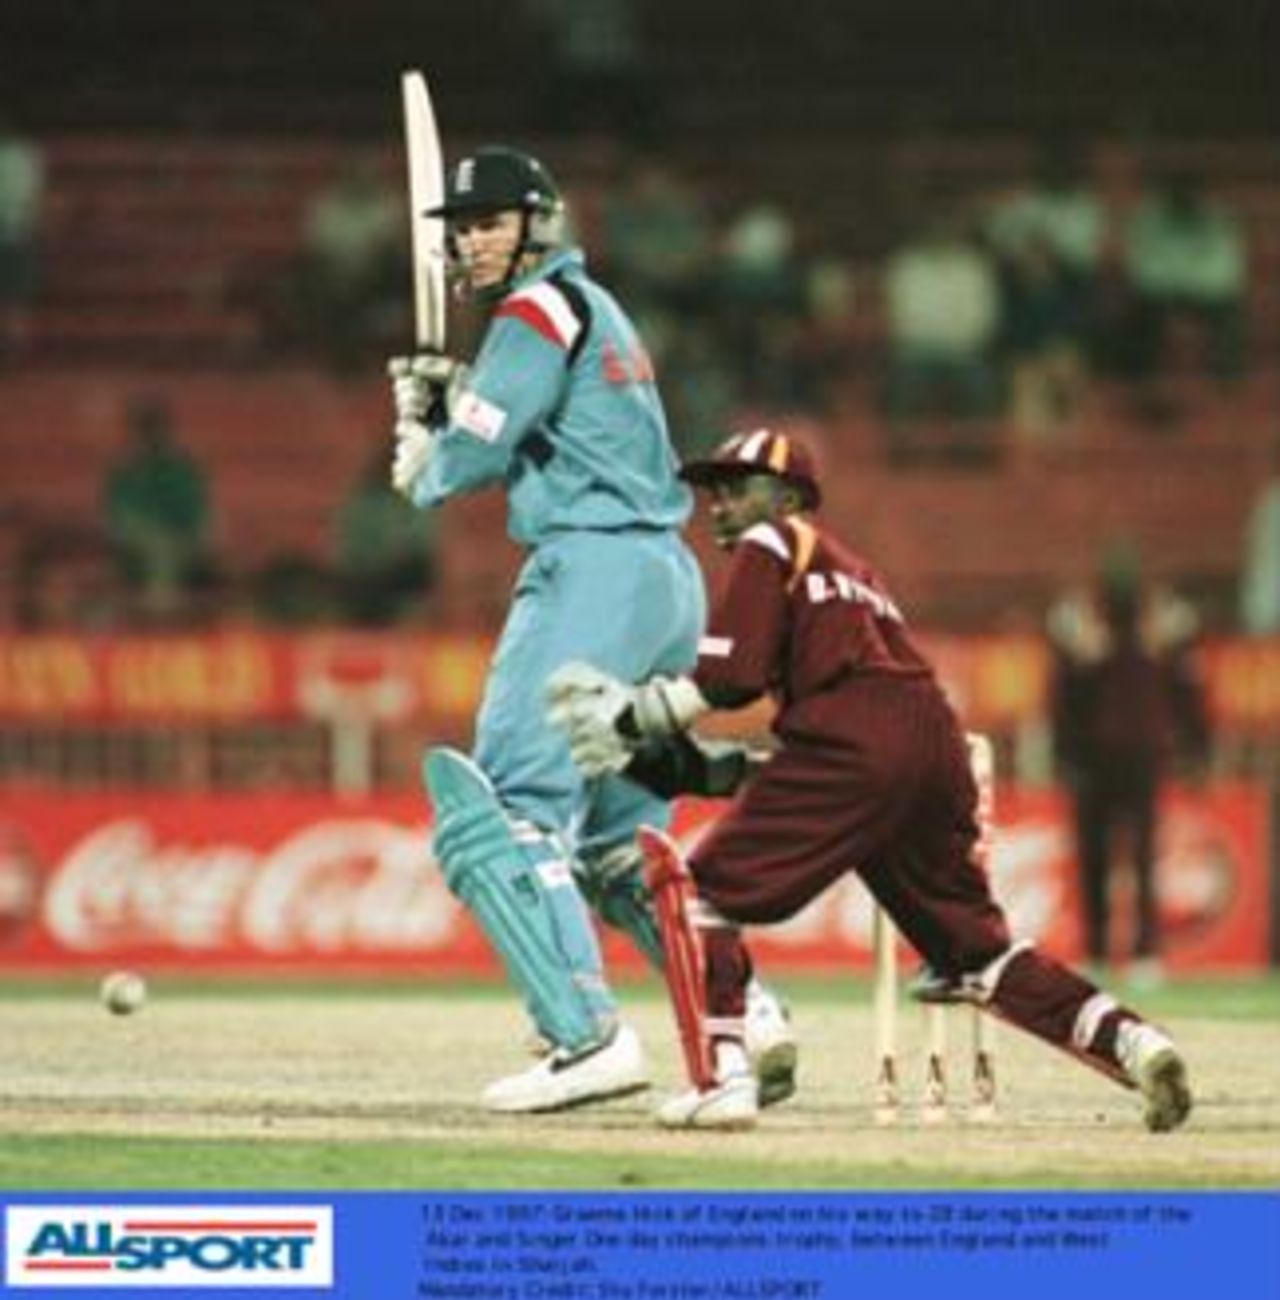 Champions Trophy 1997: England v West Indies 13 Dec 1997. Hick turns a ball to leg past Williams.